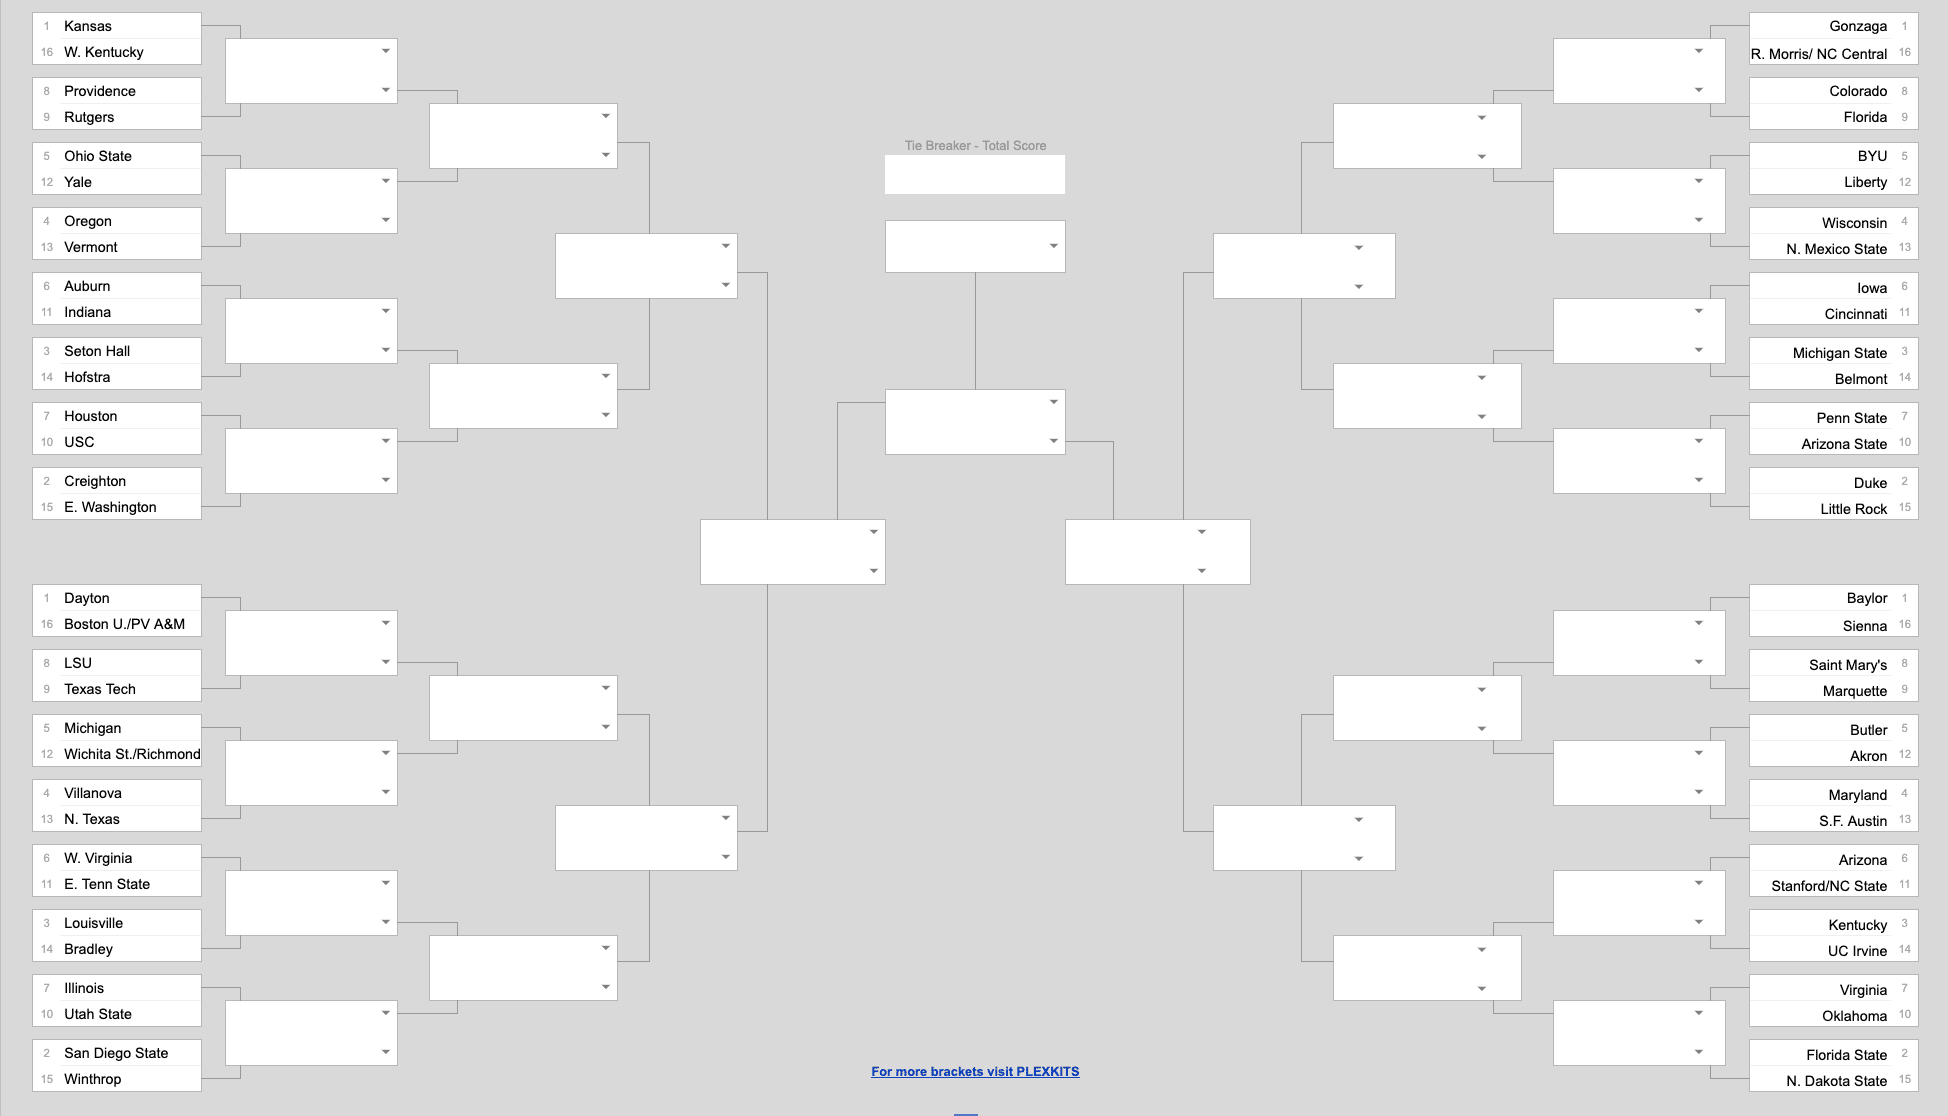 2020 NCAA Tournament Results